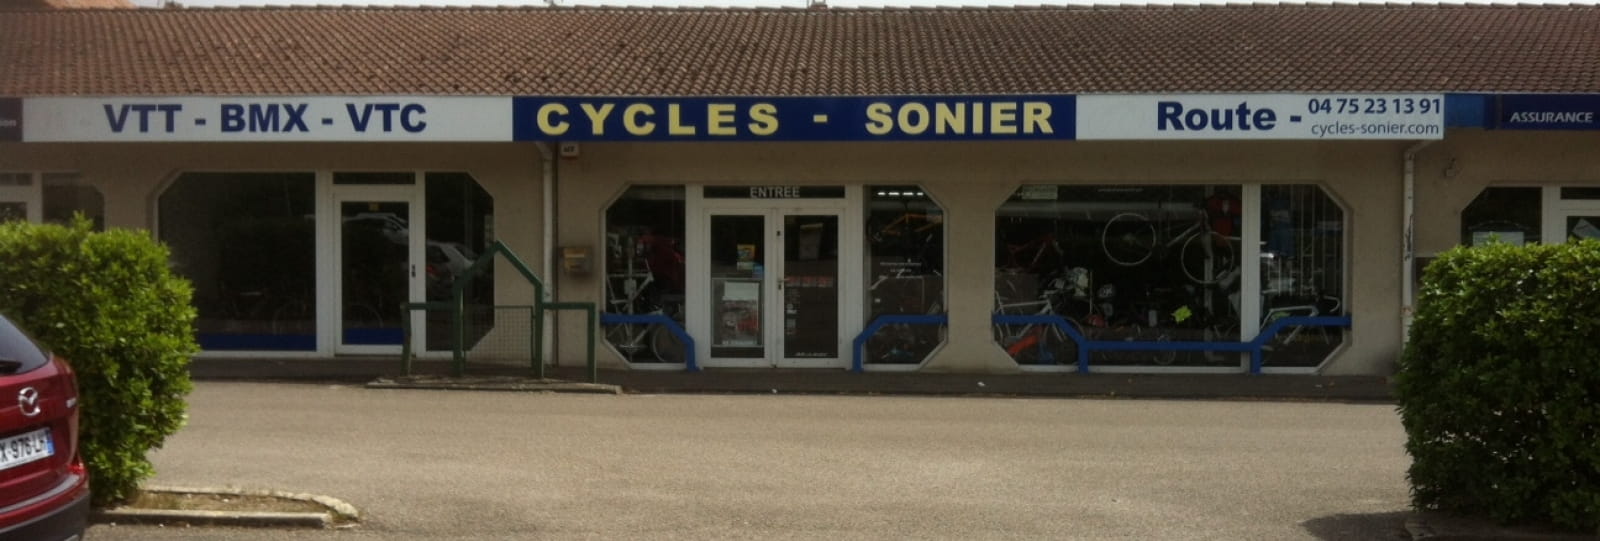 Magasin cycles sonier